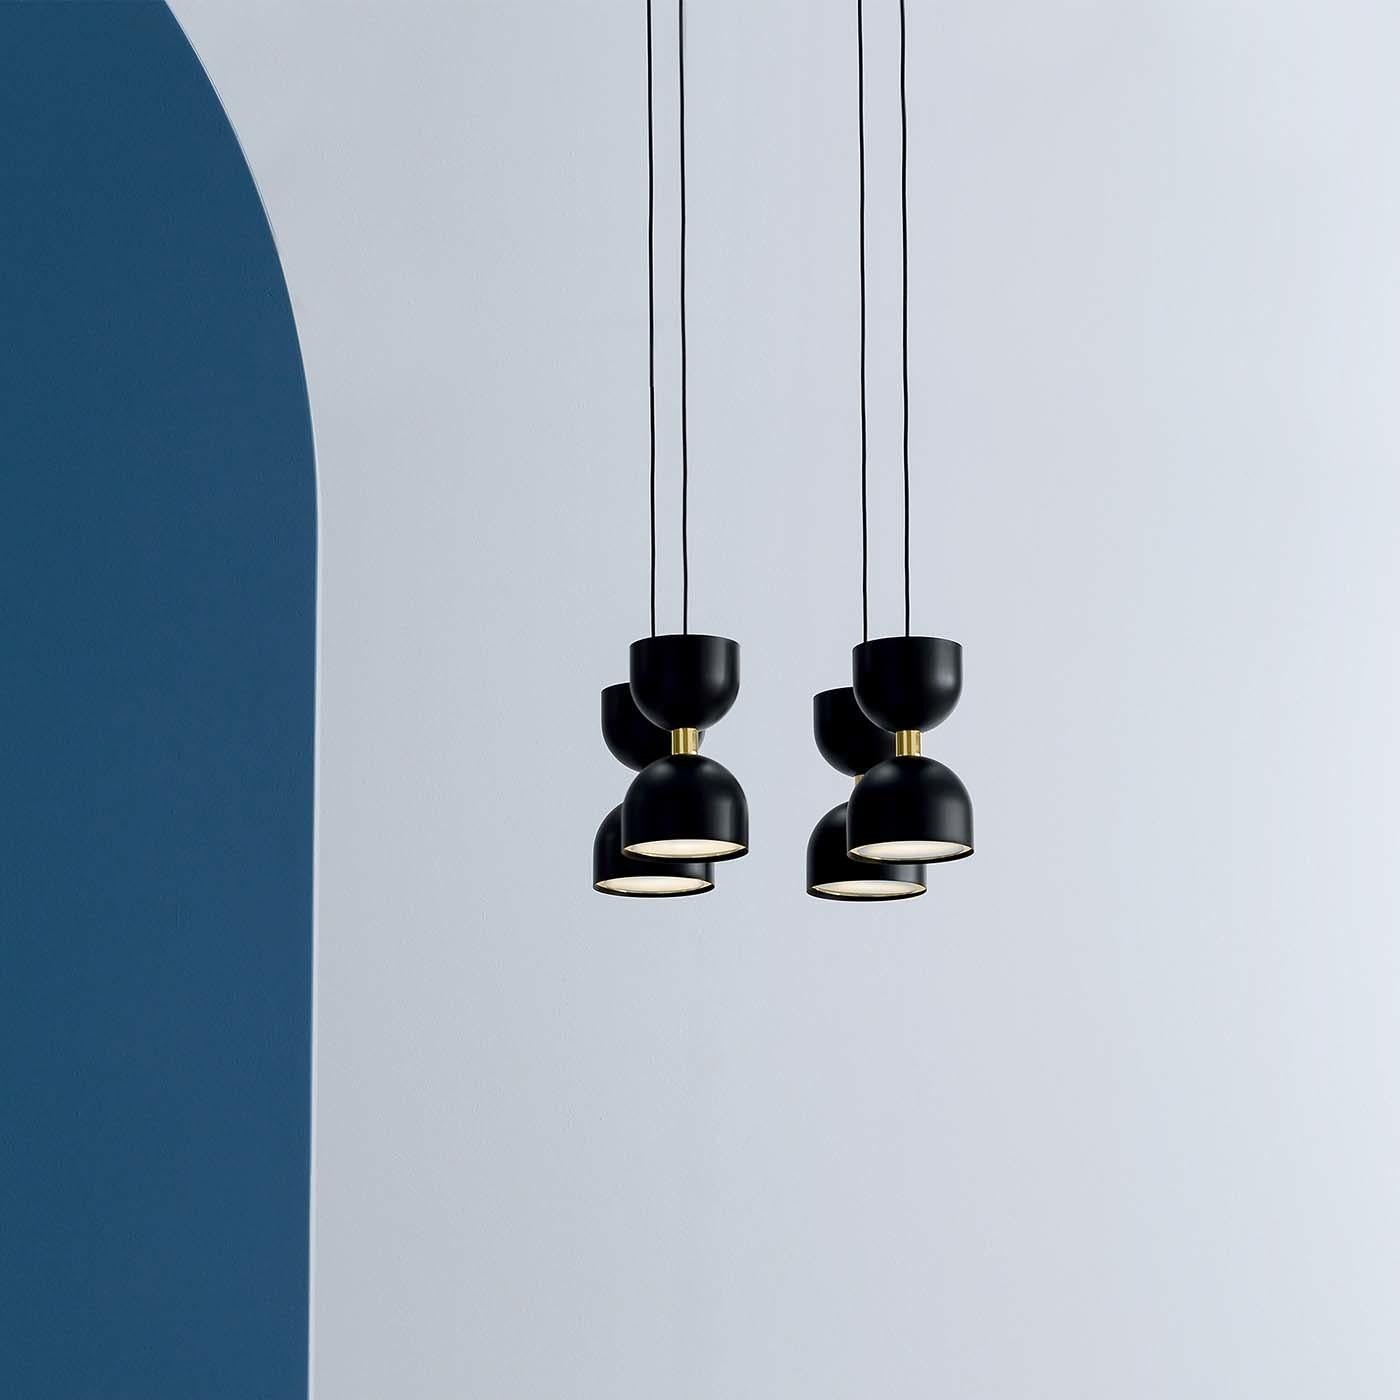 Part of the Clessidra collection, this modular composition of ceiling lamps is named after the Italian word for hourglass. The delicately rounded and symmetrical shapes of the four shades is crafted of metal with a black matte finish (also available